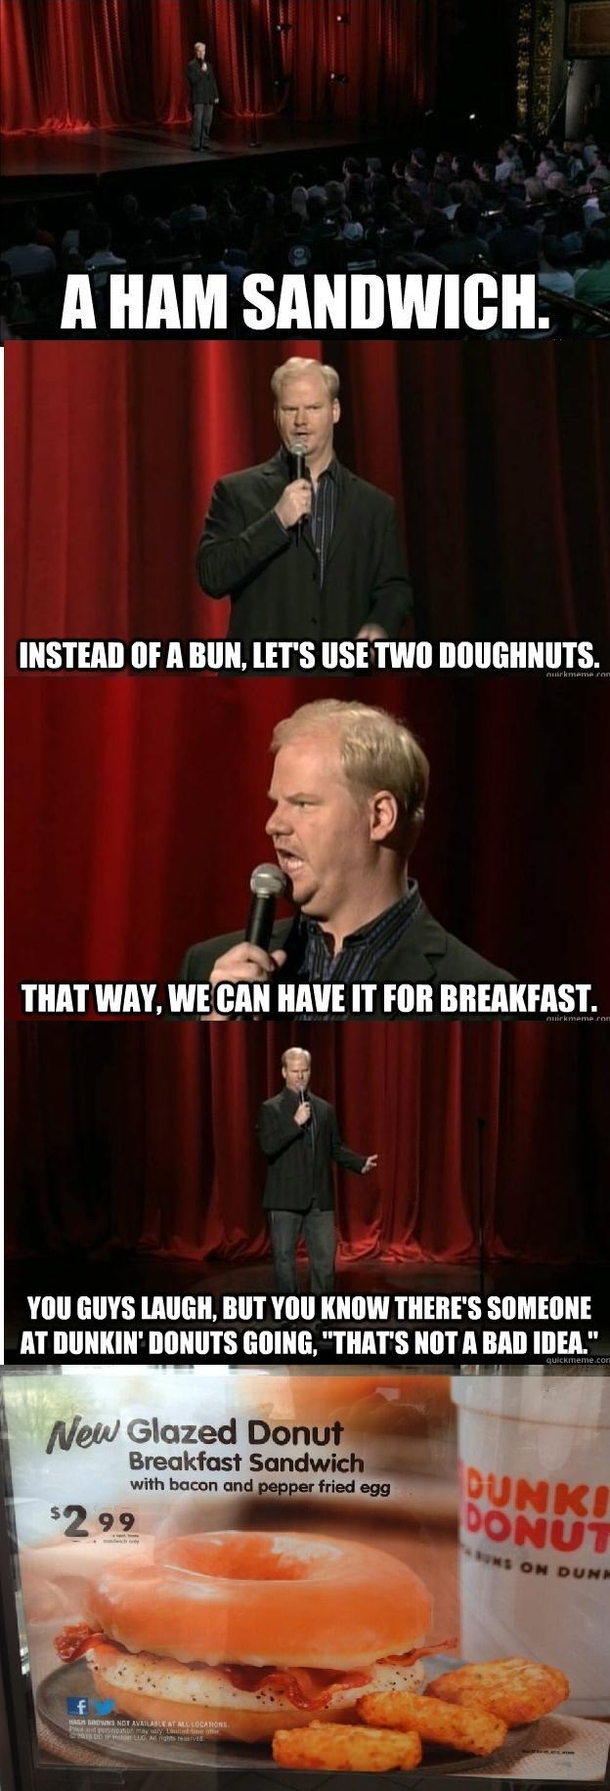 Jim Gaffigan near perfectly predicts the future of food